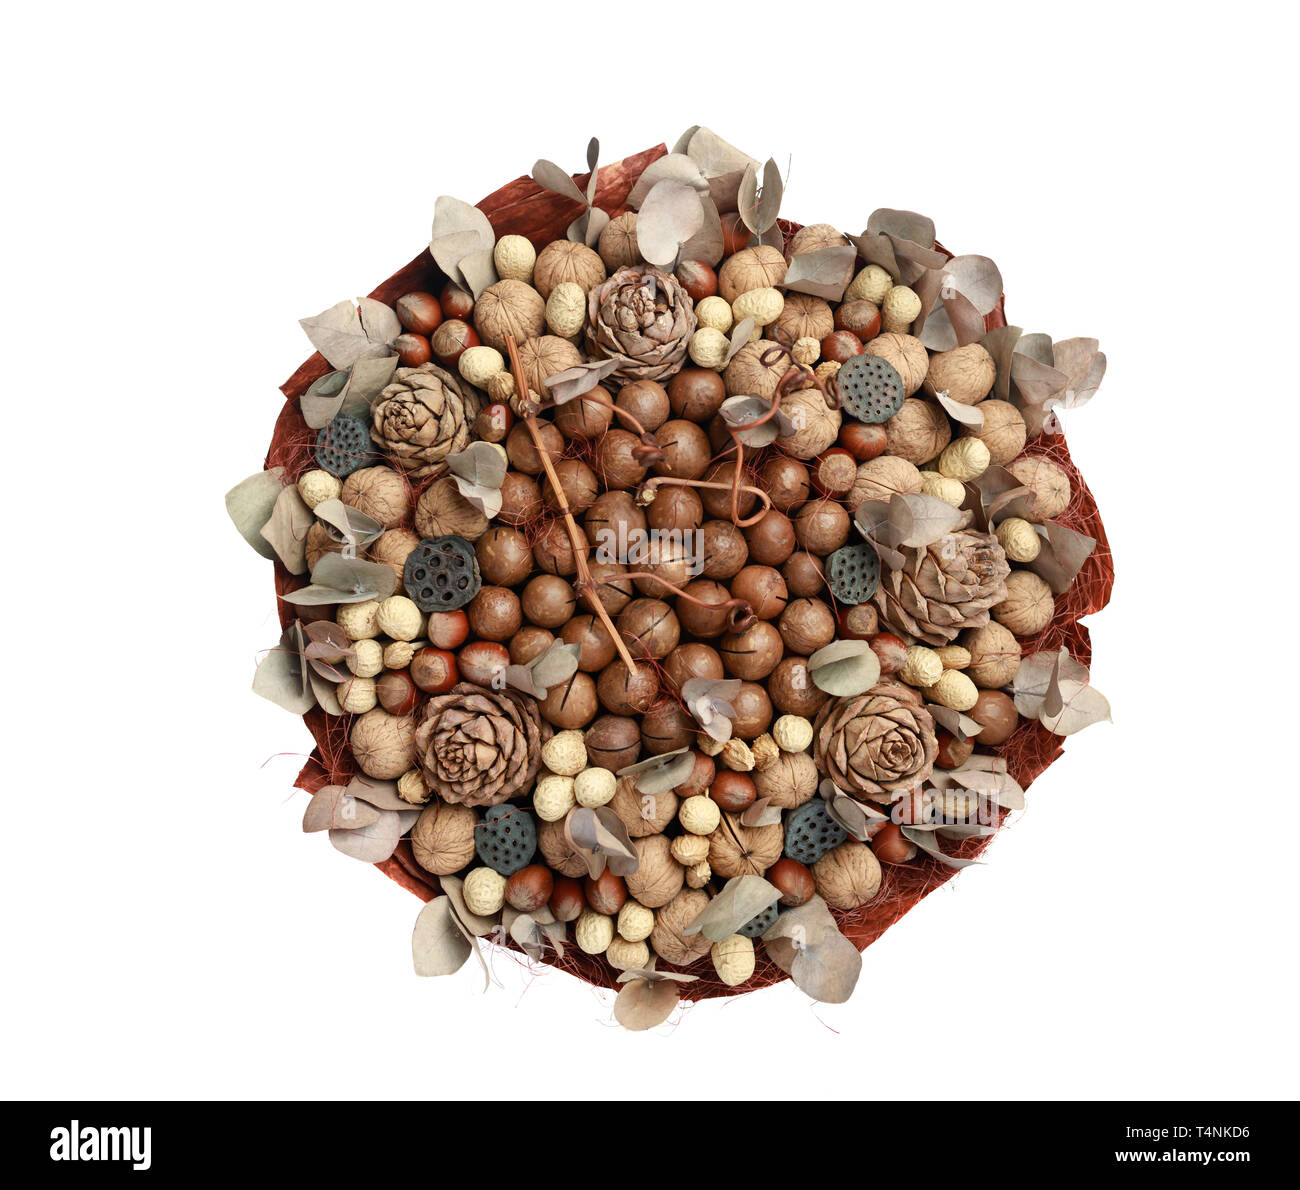 Unique bouquet made up of different types of nuts, decorated with leaves, cones and twigs. Top view on white background Stock Photo